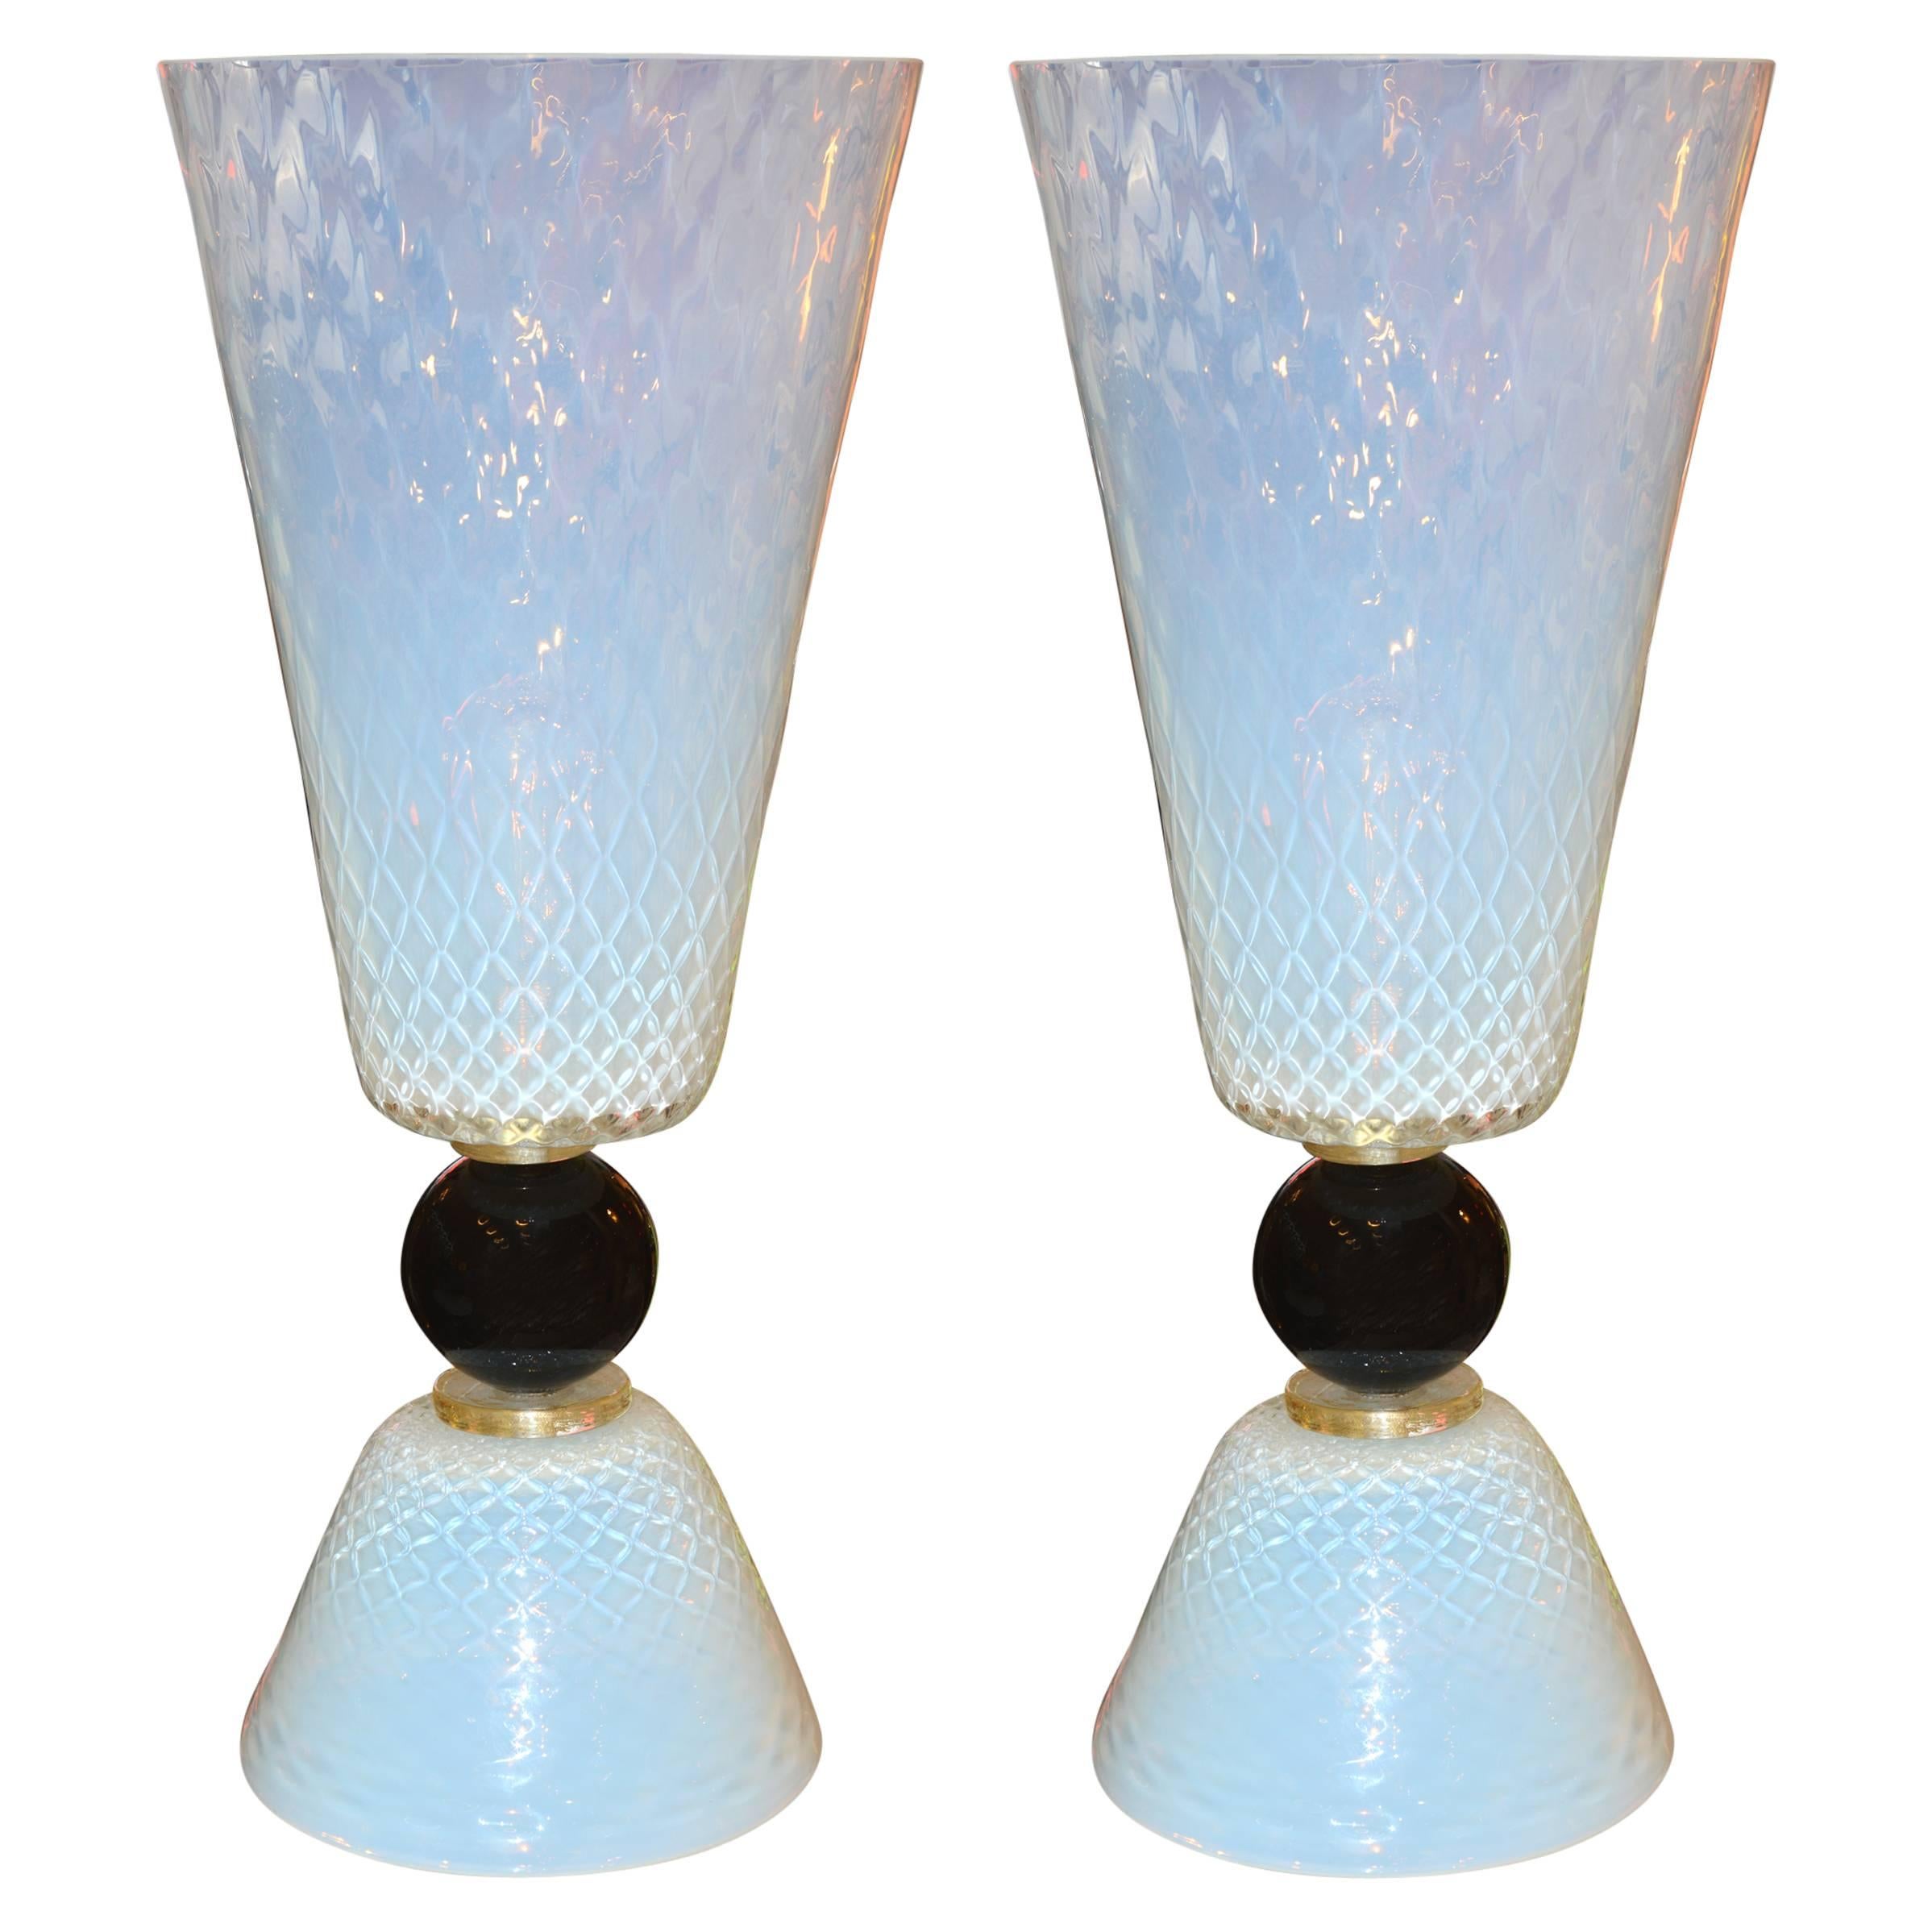 Murano Glass Vase Lamp Set of Two Exceptional Pieces Hand Worked, 1950